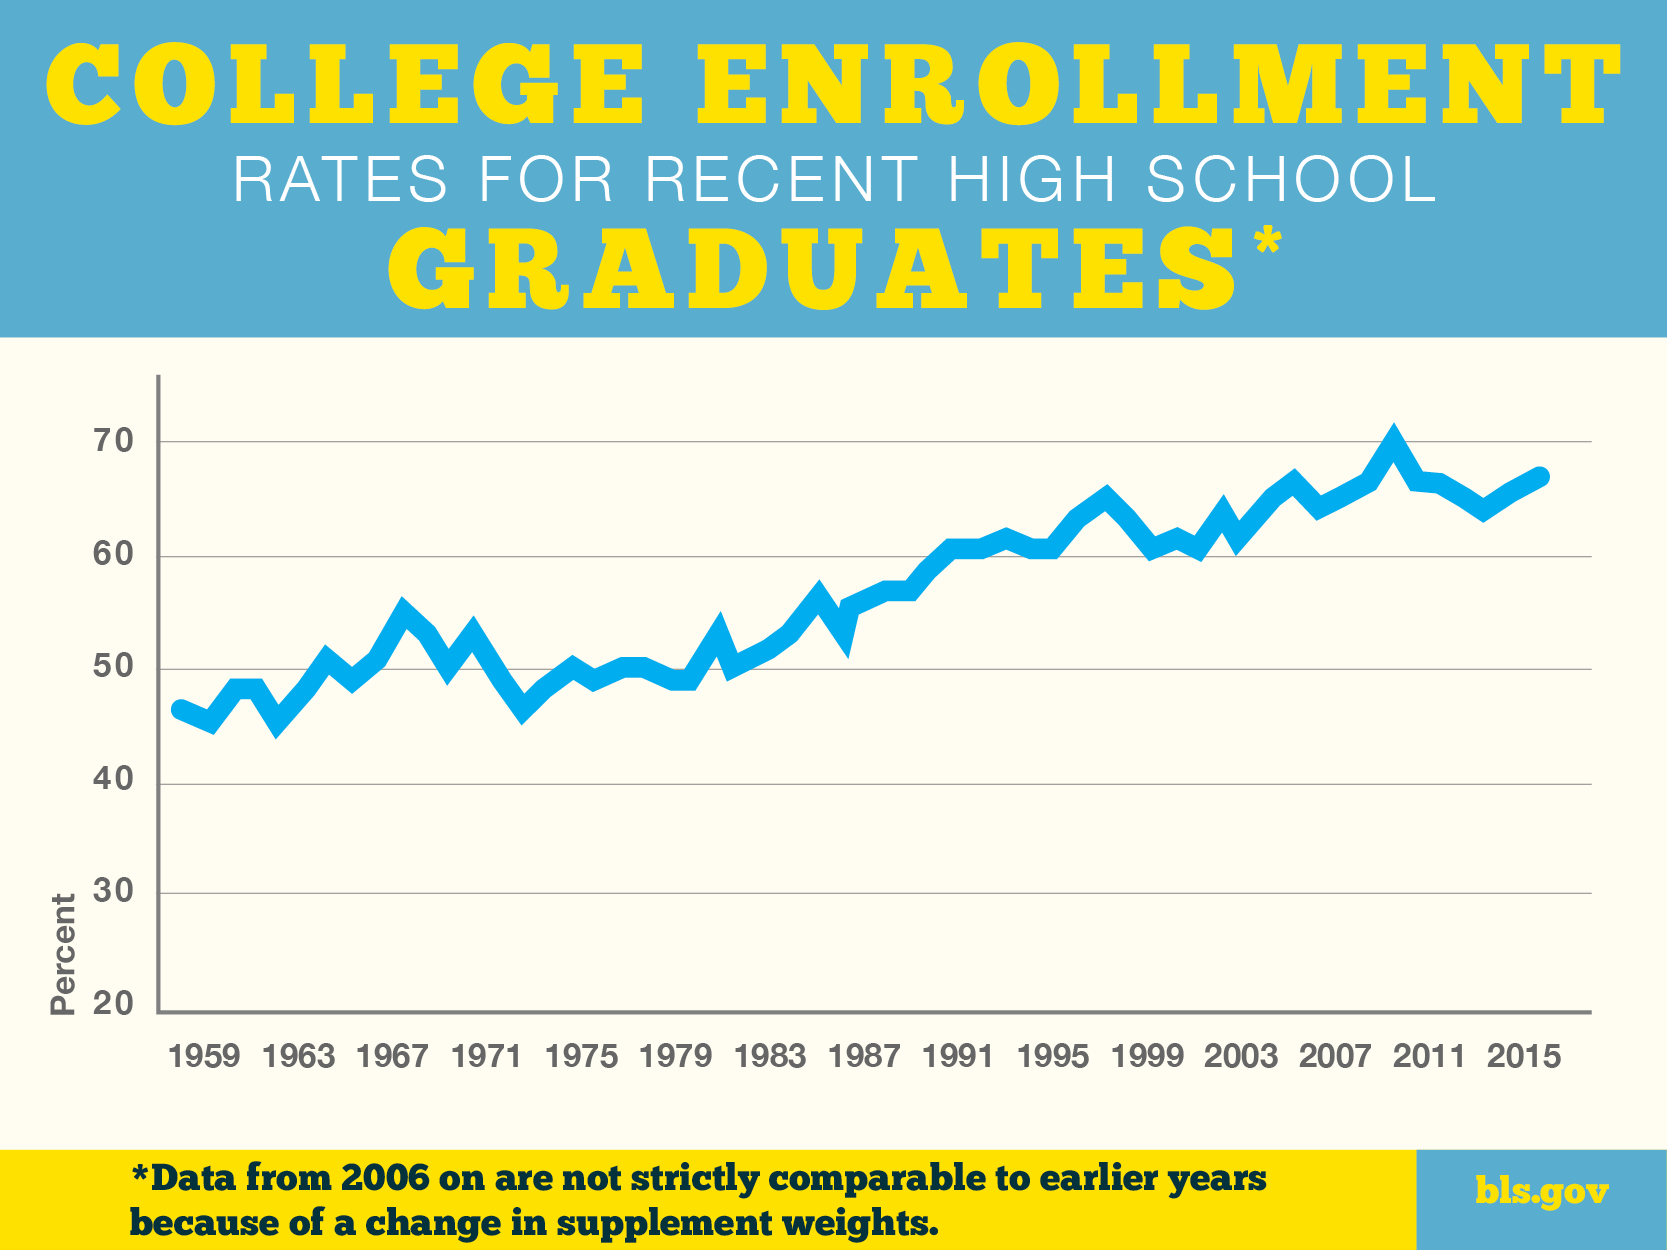 A chart showing college enrollment rates for recent high school graduates from 1959 to 2015.